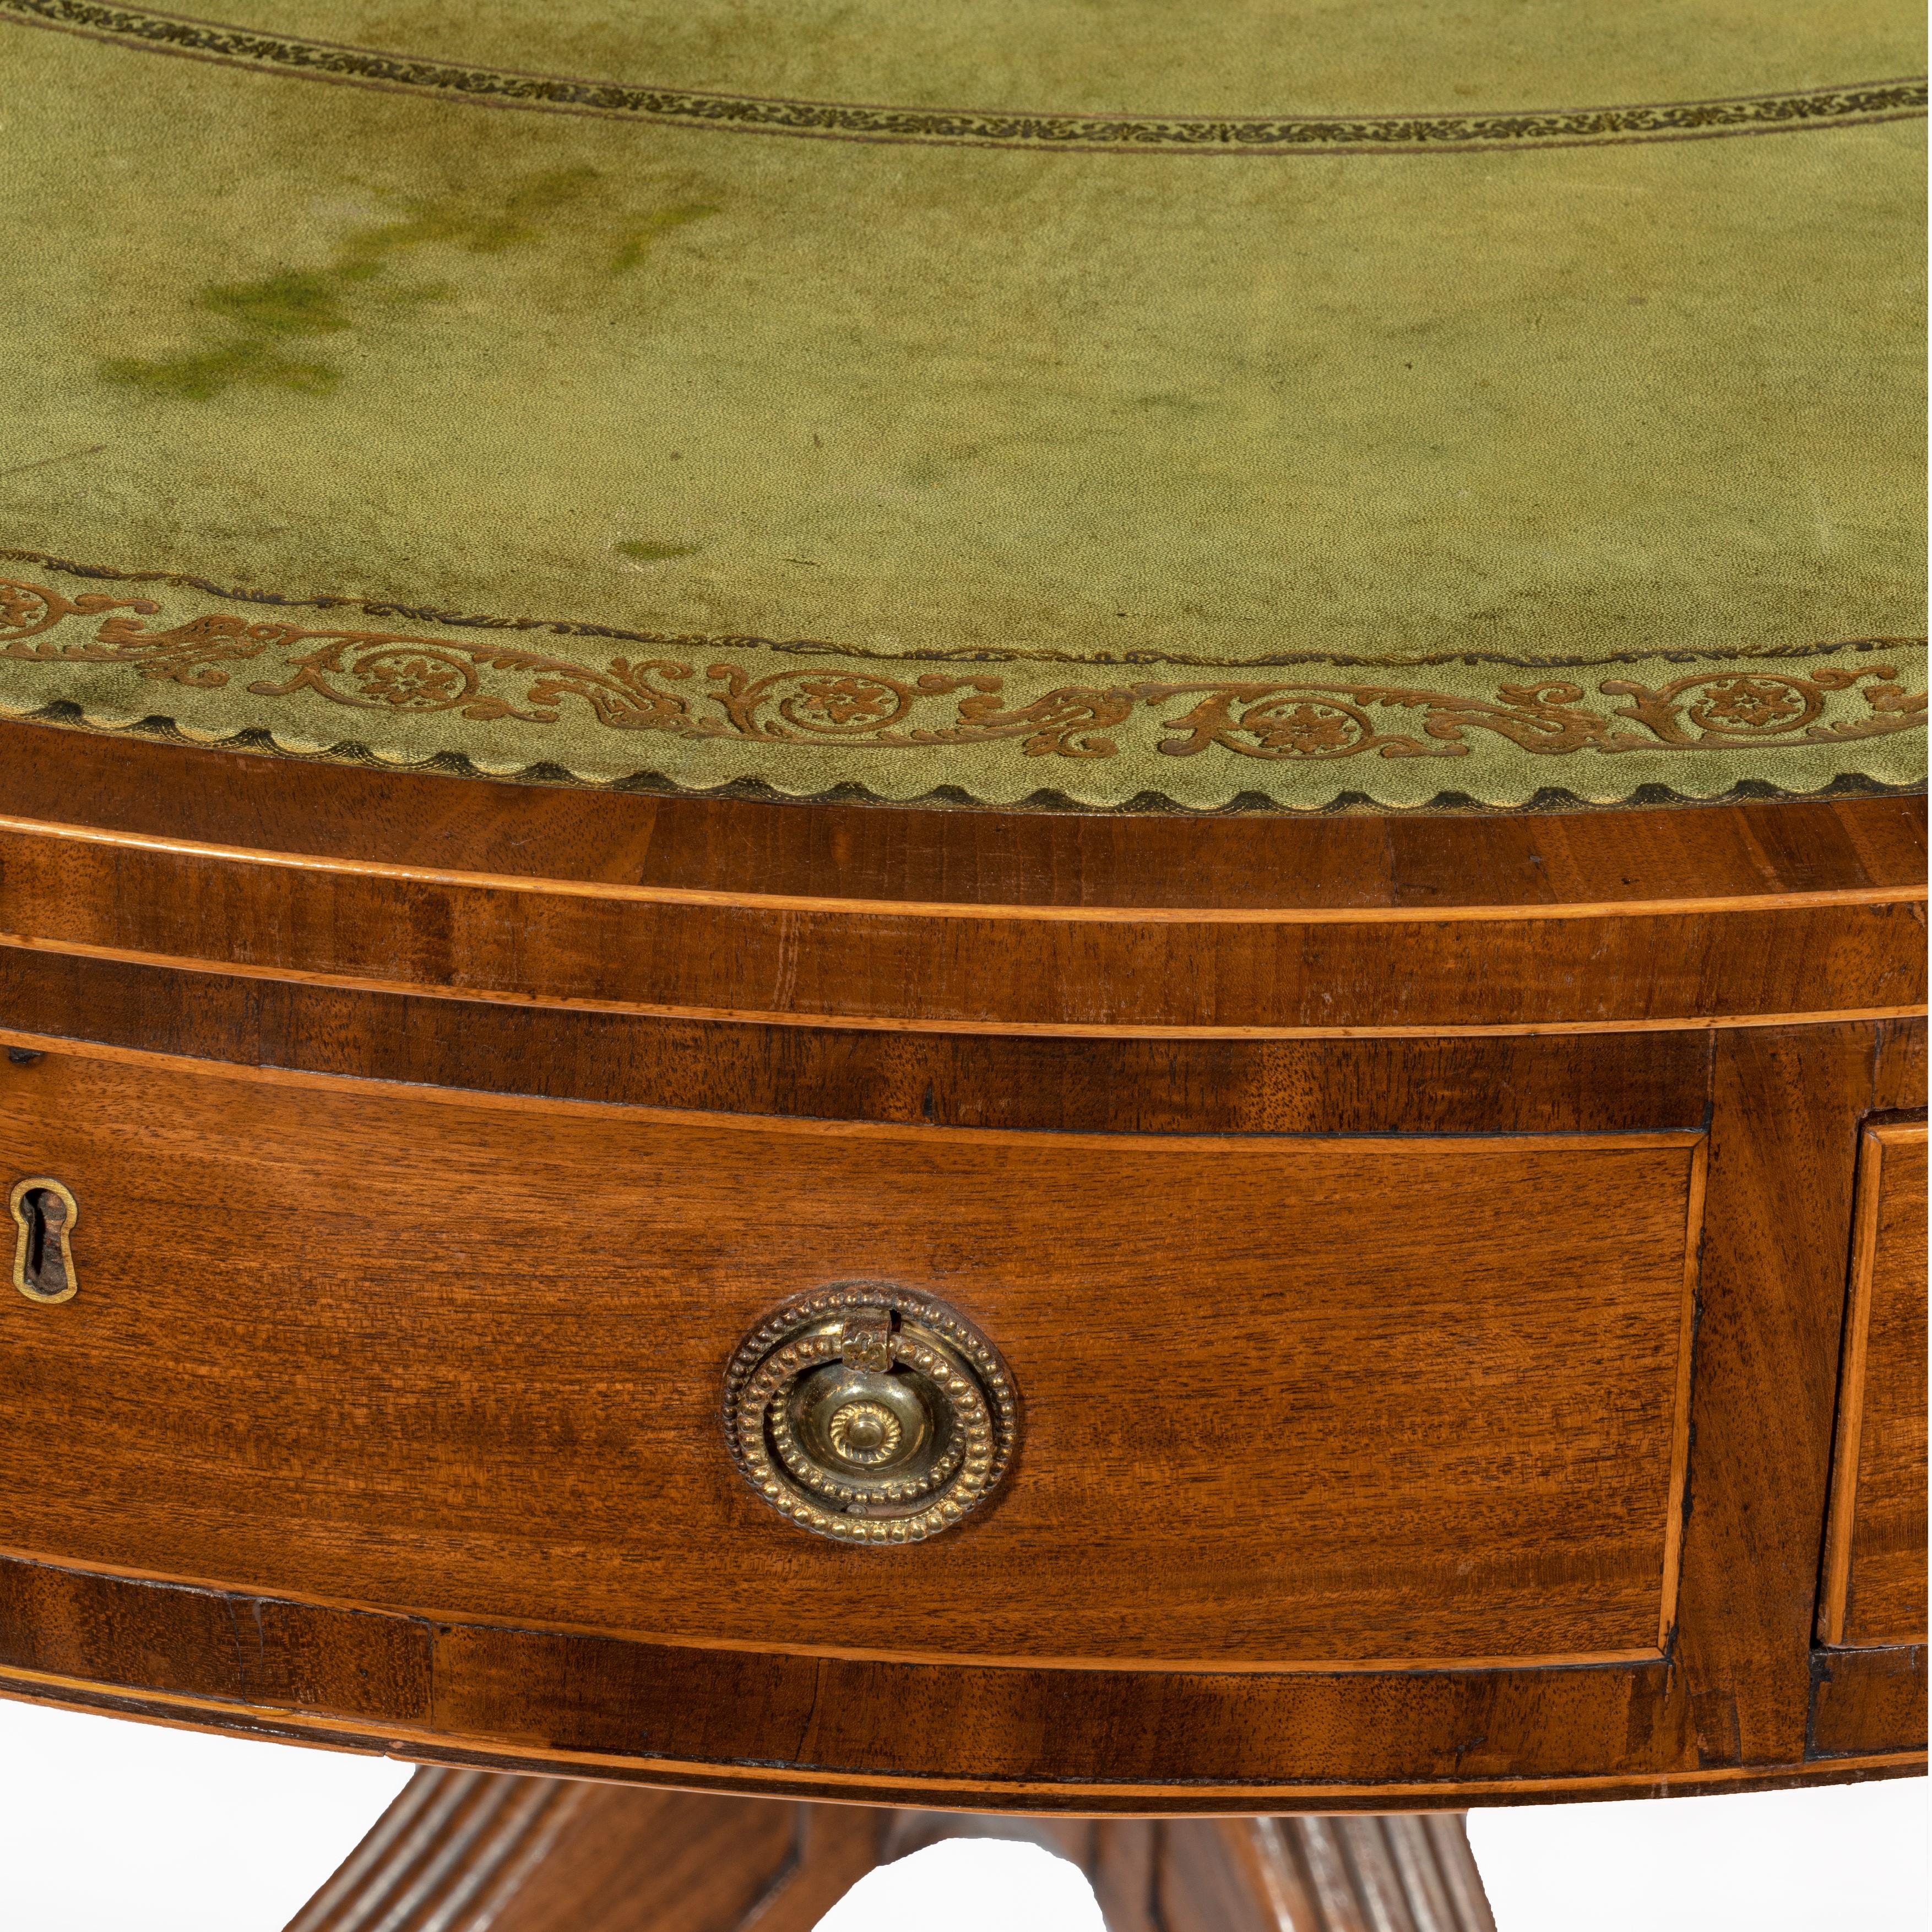 Late George III Revolving Mahogany Drum Table Attributed to Gillows In Good Condition For Sale In Lymington, Hampshire